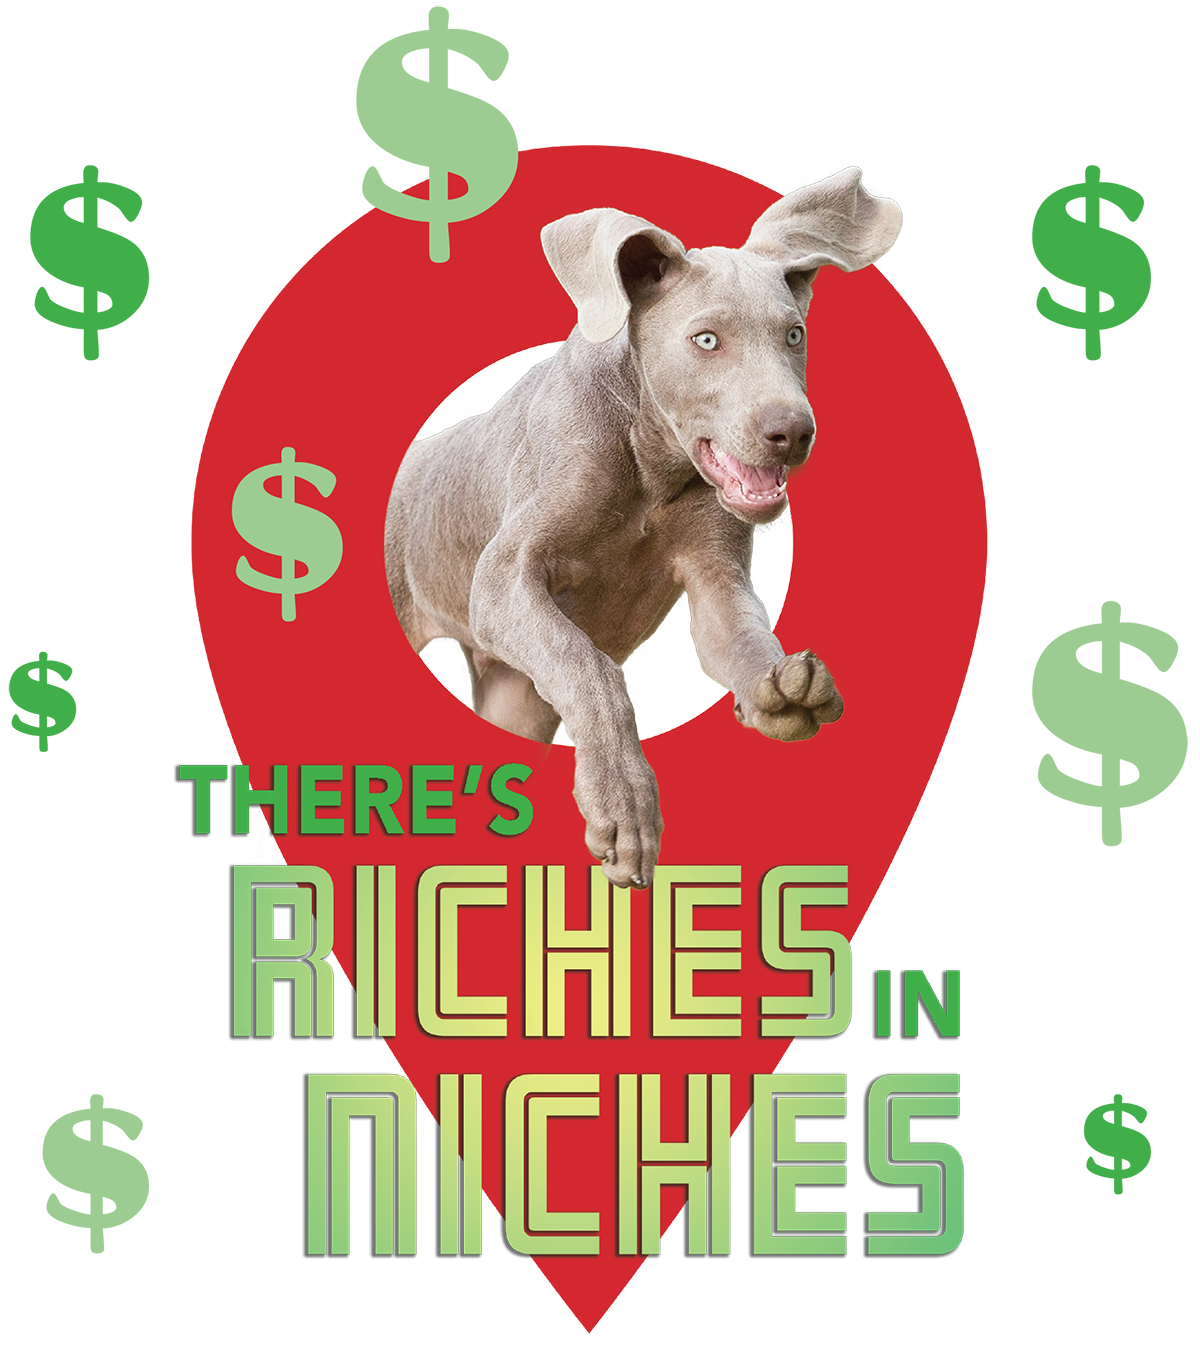 There's Riches in Niches green gradient typographic title in uppercase letters form over a red pindrop and a grey/brown colored dog jumping through the pindrop surrounded by eight green money dollar currency symbols